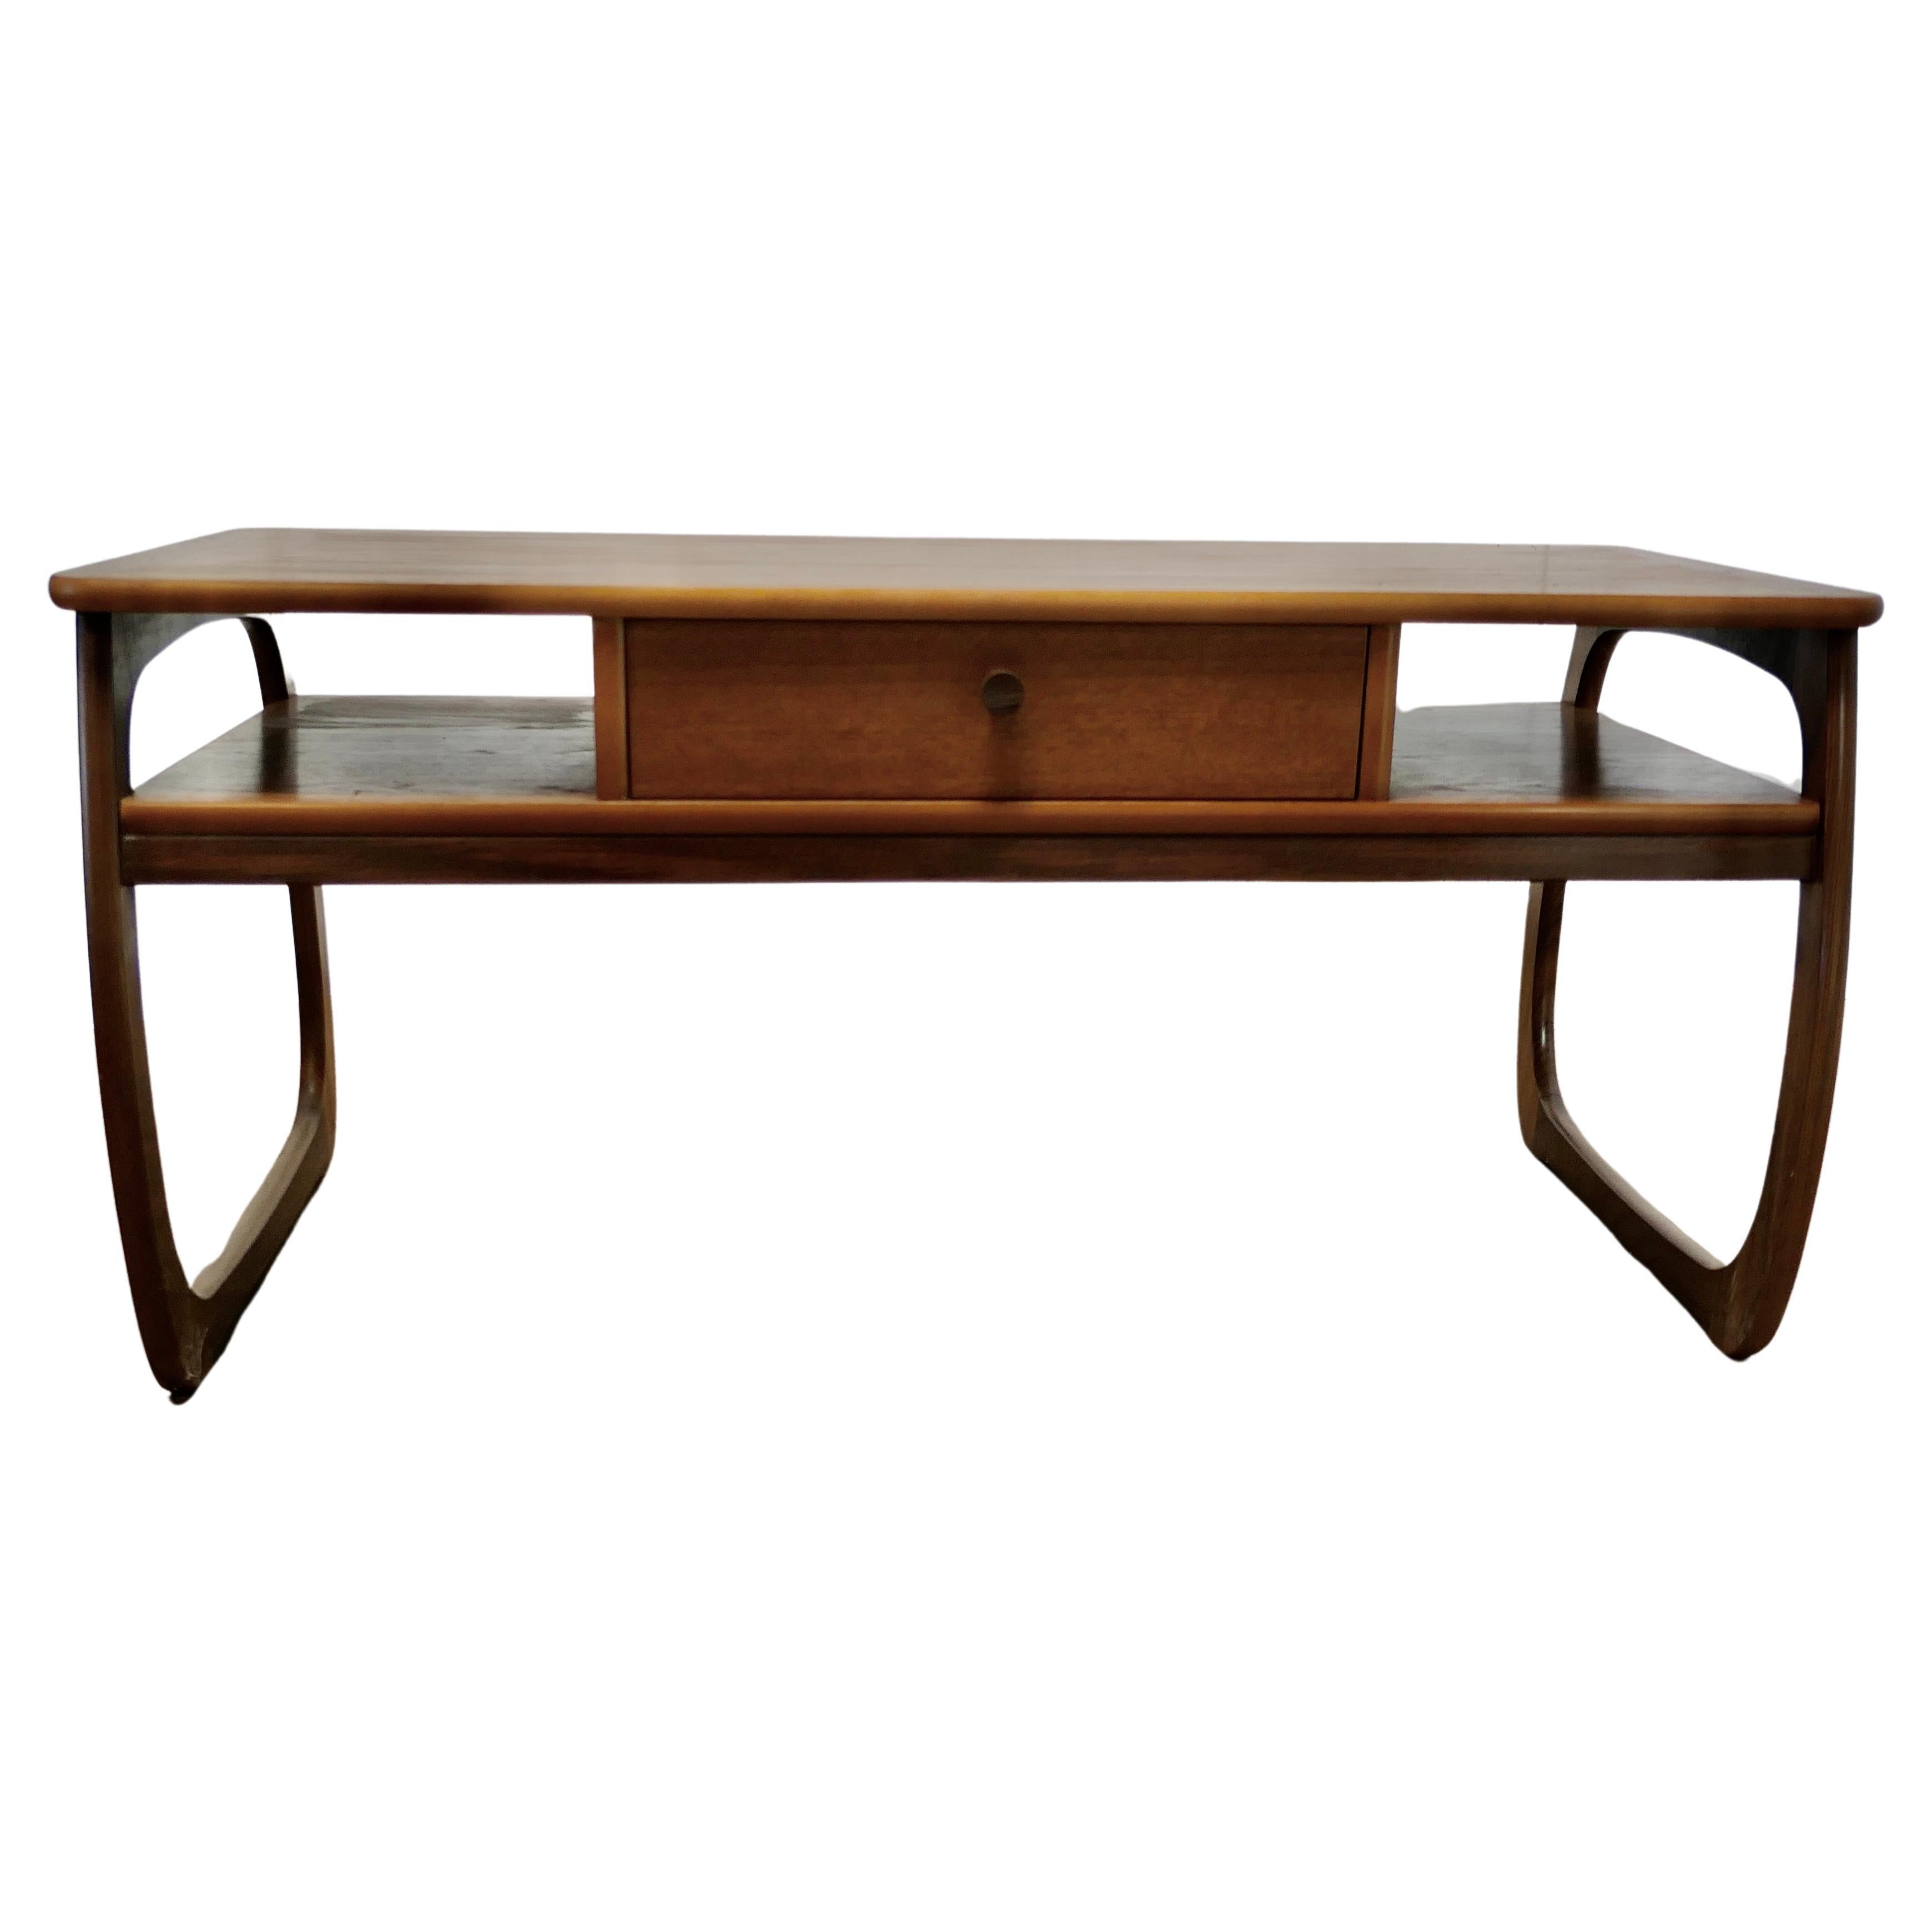 Long 1950s Parker Knoll Cube Shape Coffee Table  This is a good sturdy table 